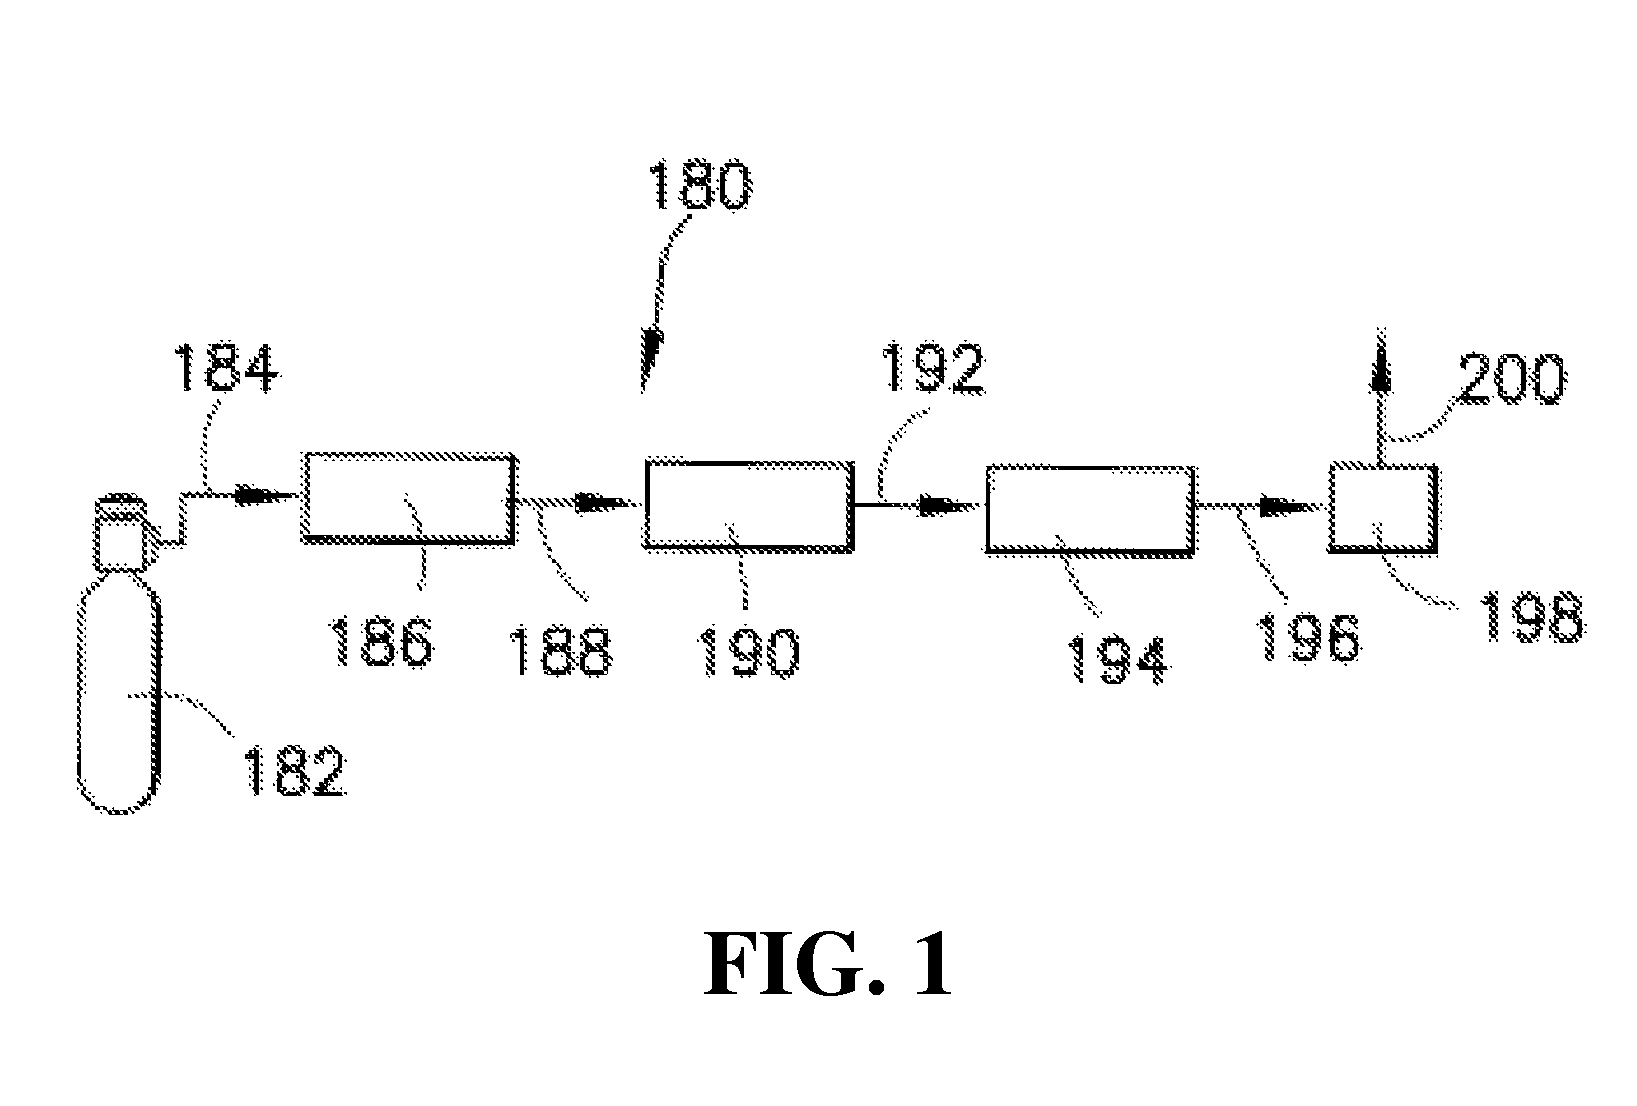 Isotopically-enriched boron-containing compounds, and methods of making and using same